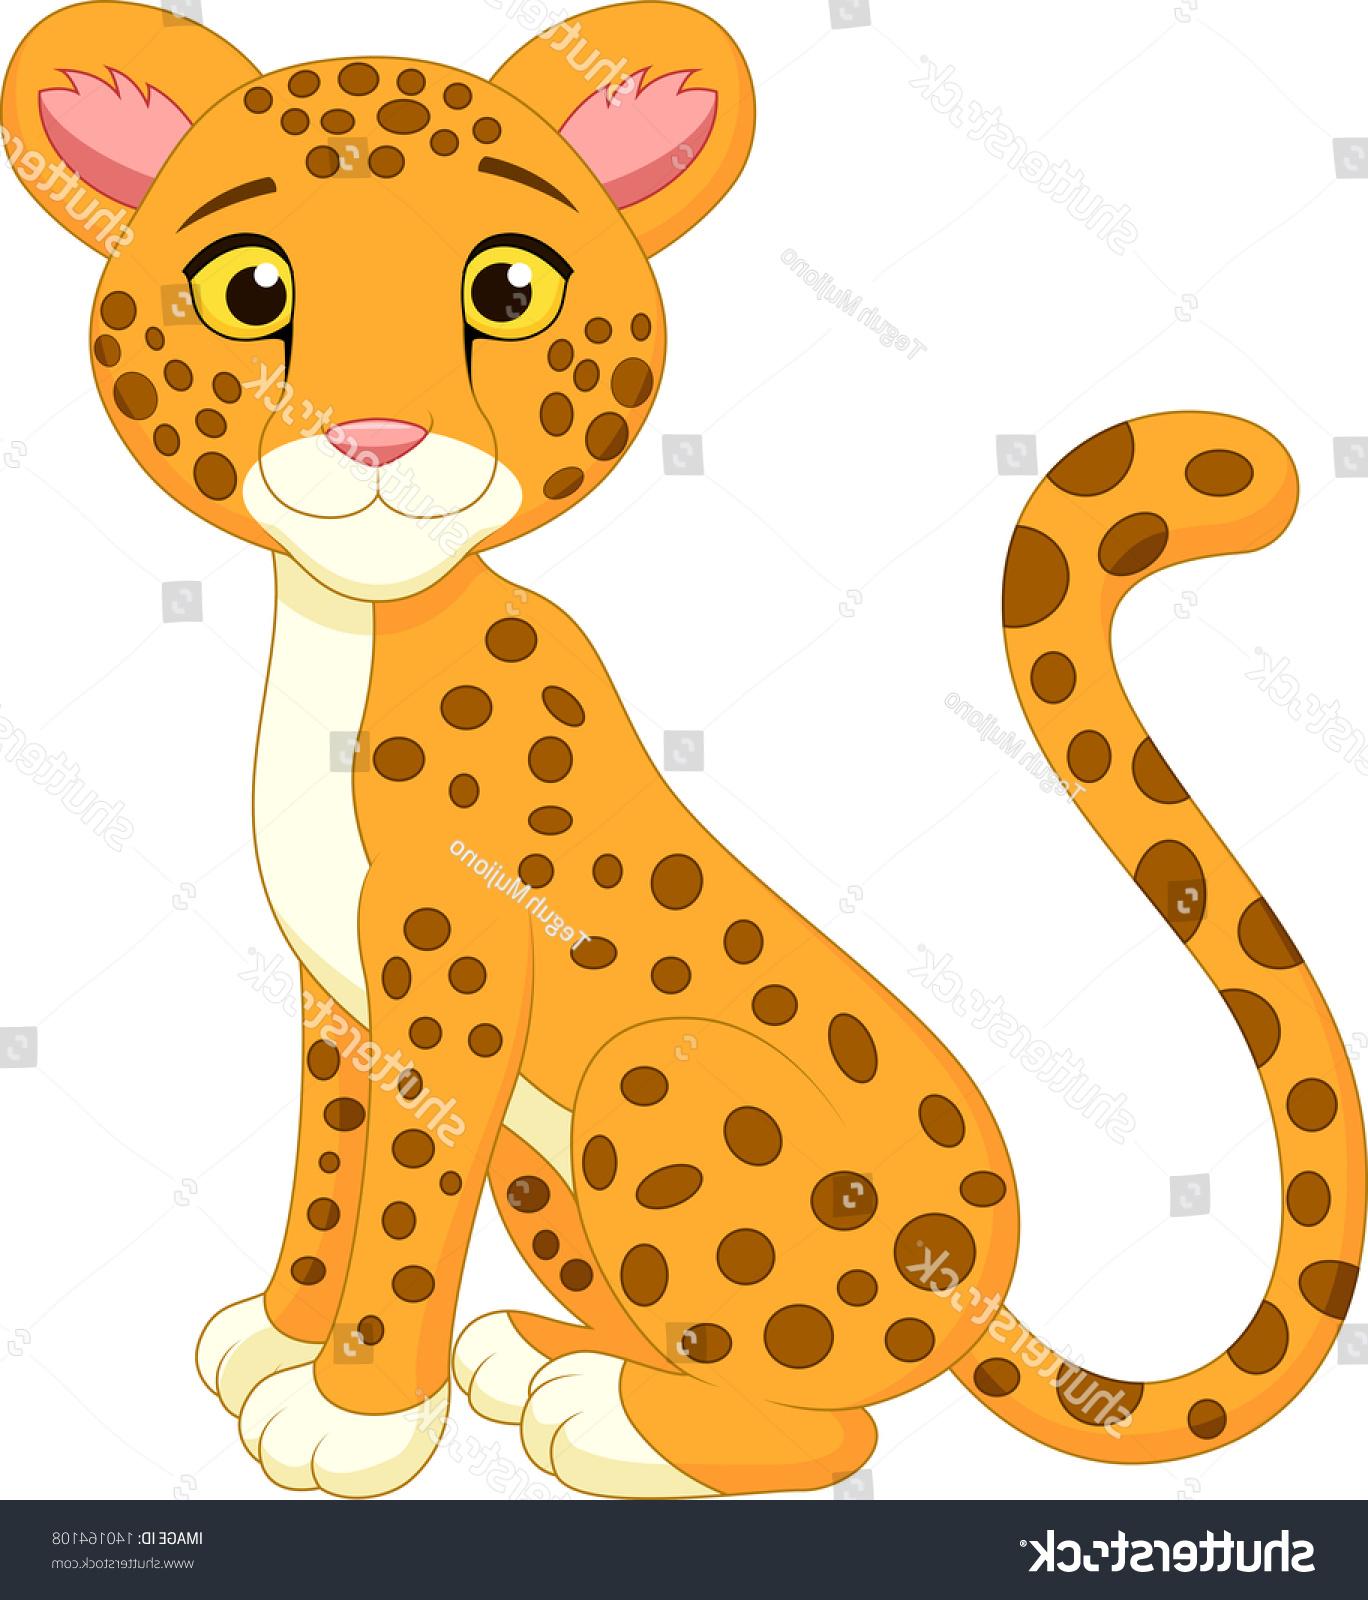 Cheetah Drawing Easy Cute - How To Draw A Simple Cheetah For Kids : Buy